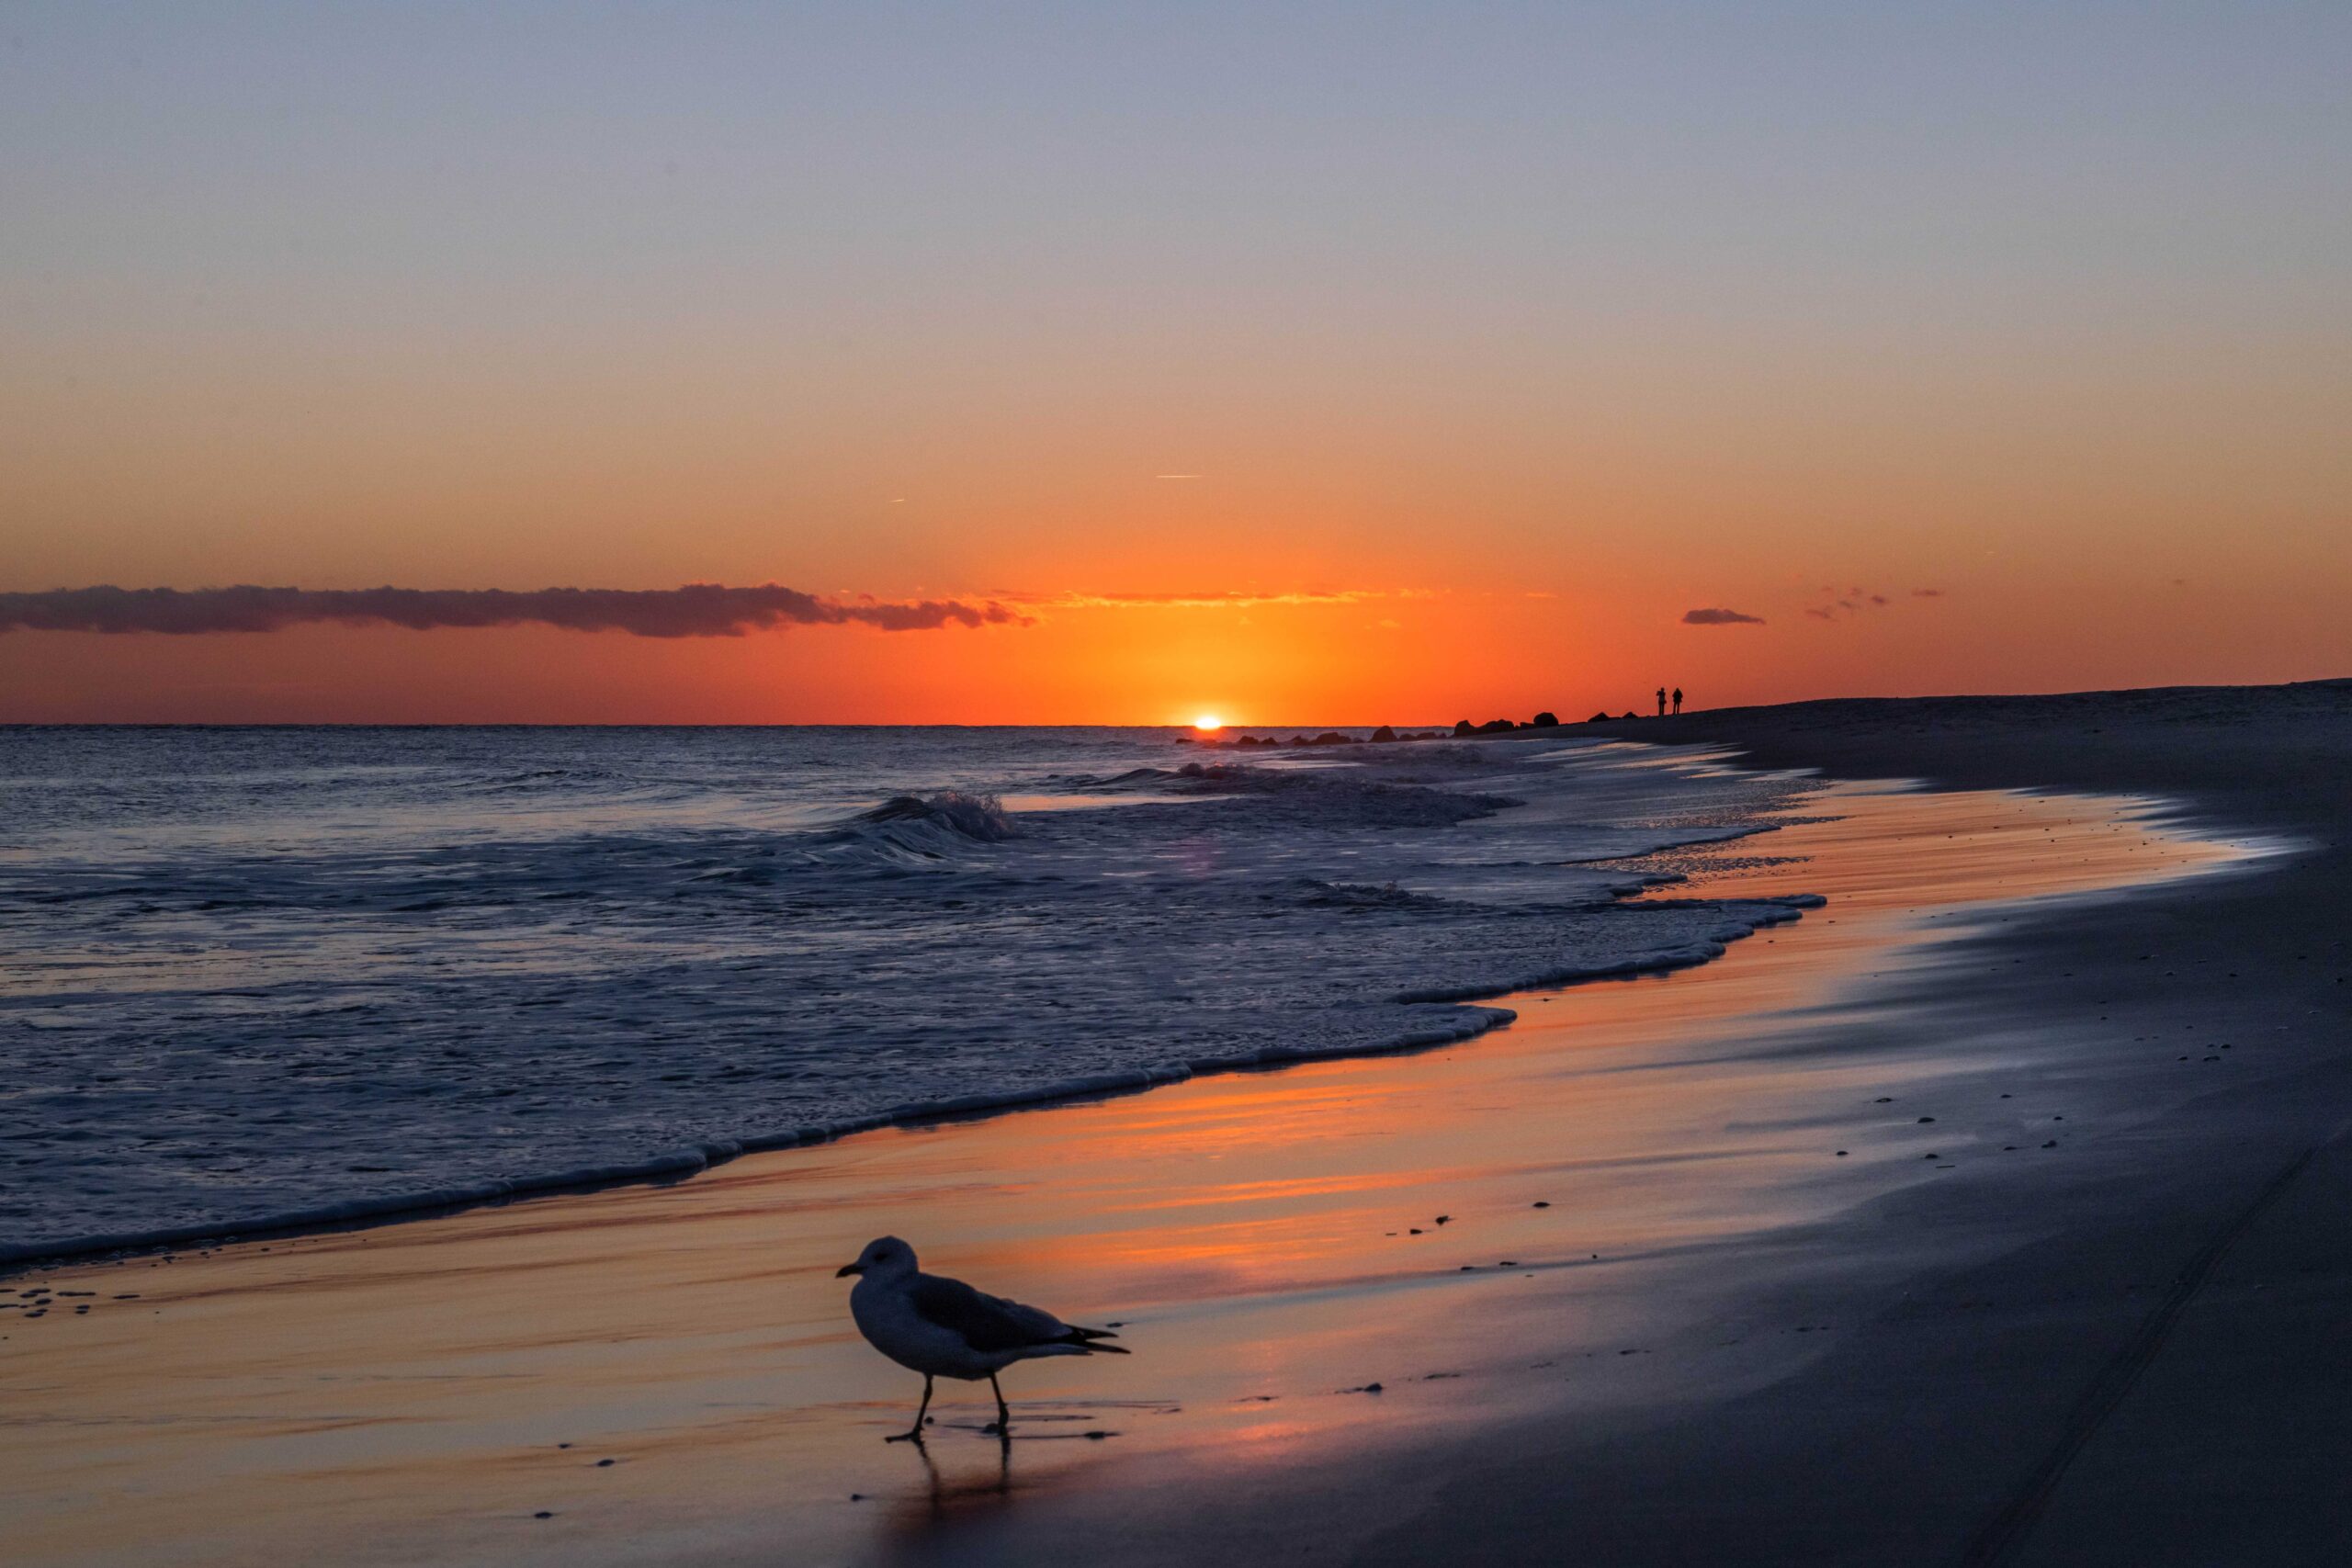 A close up of a seagull at the shoreline with the ocean coming in at sunset. The sky is orange, pink, and blue, and two people are in the distance at the horizon line.